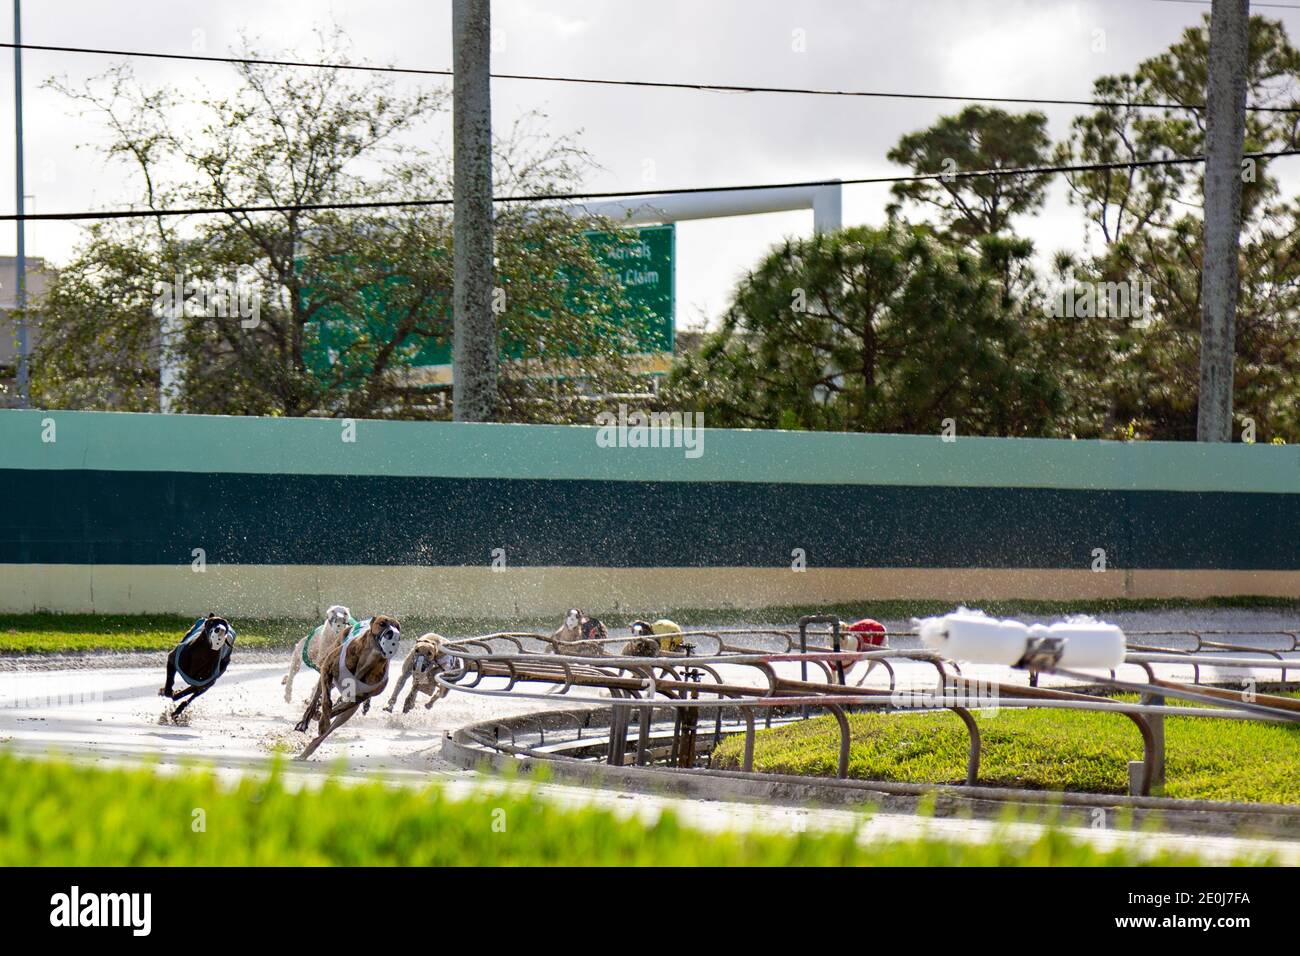 Racing greyhounds round the turn chasing the lure at the Palm Beach Kennel Club in West Palm Beach, Florida the day before the races became illegal. Stock Photo